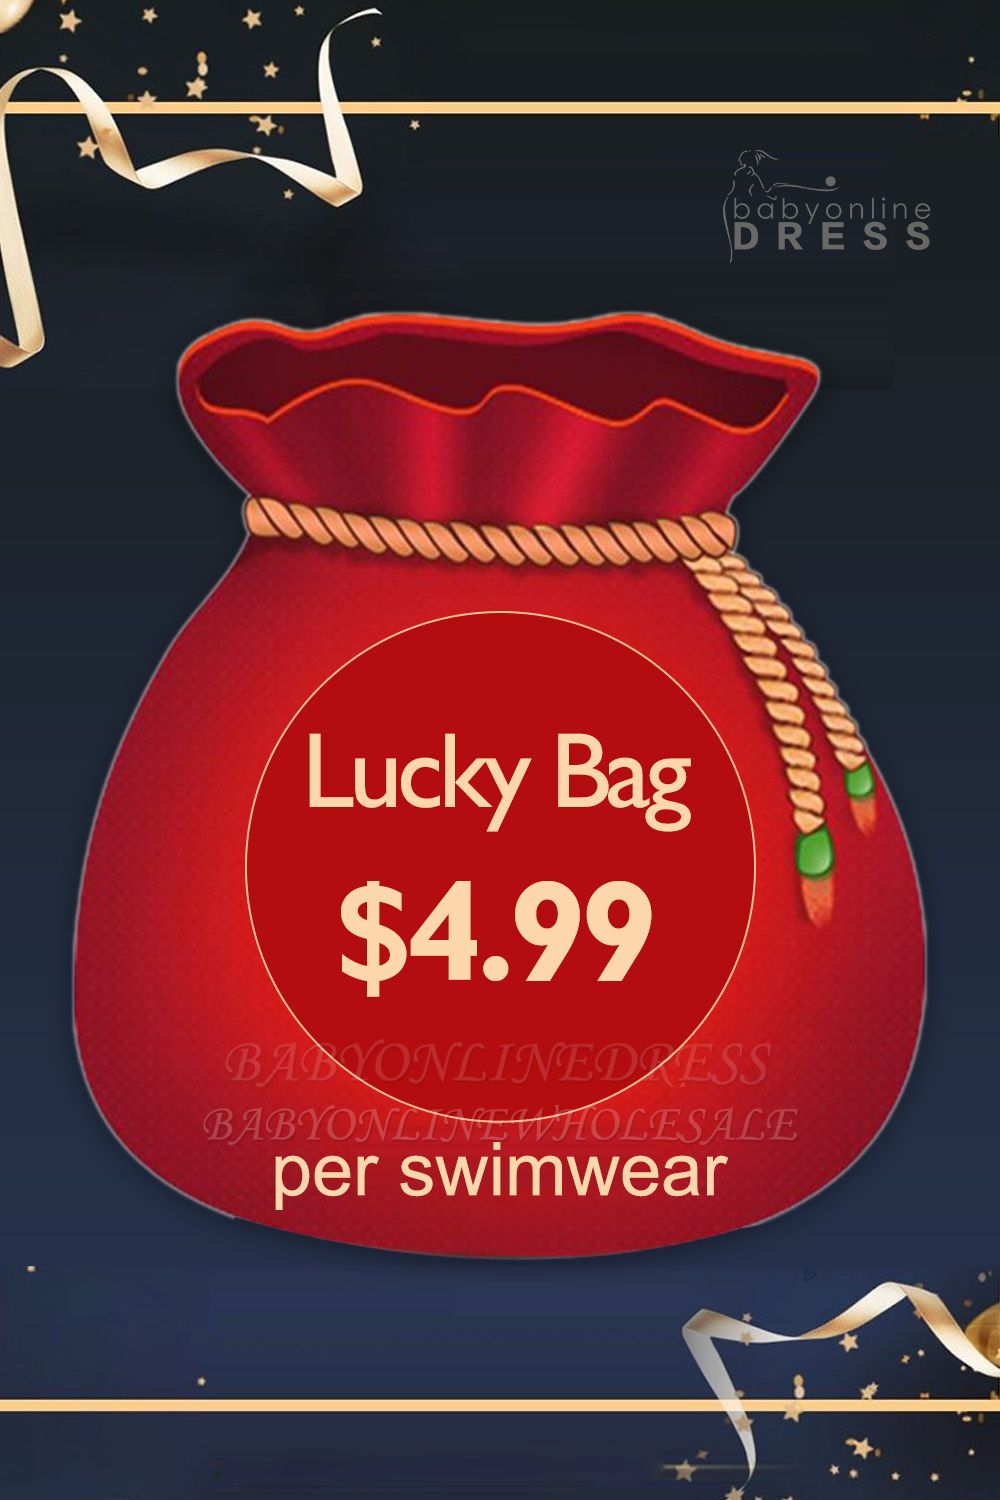 $4.99 to get Lucky Bag with a Random Hot Sale Swimwear